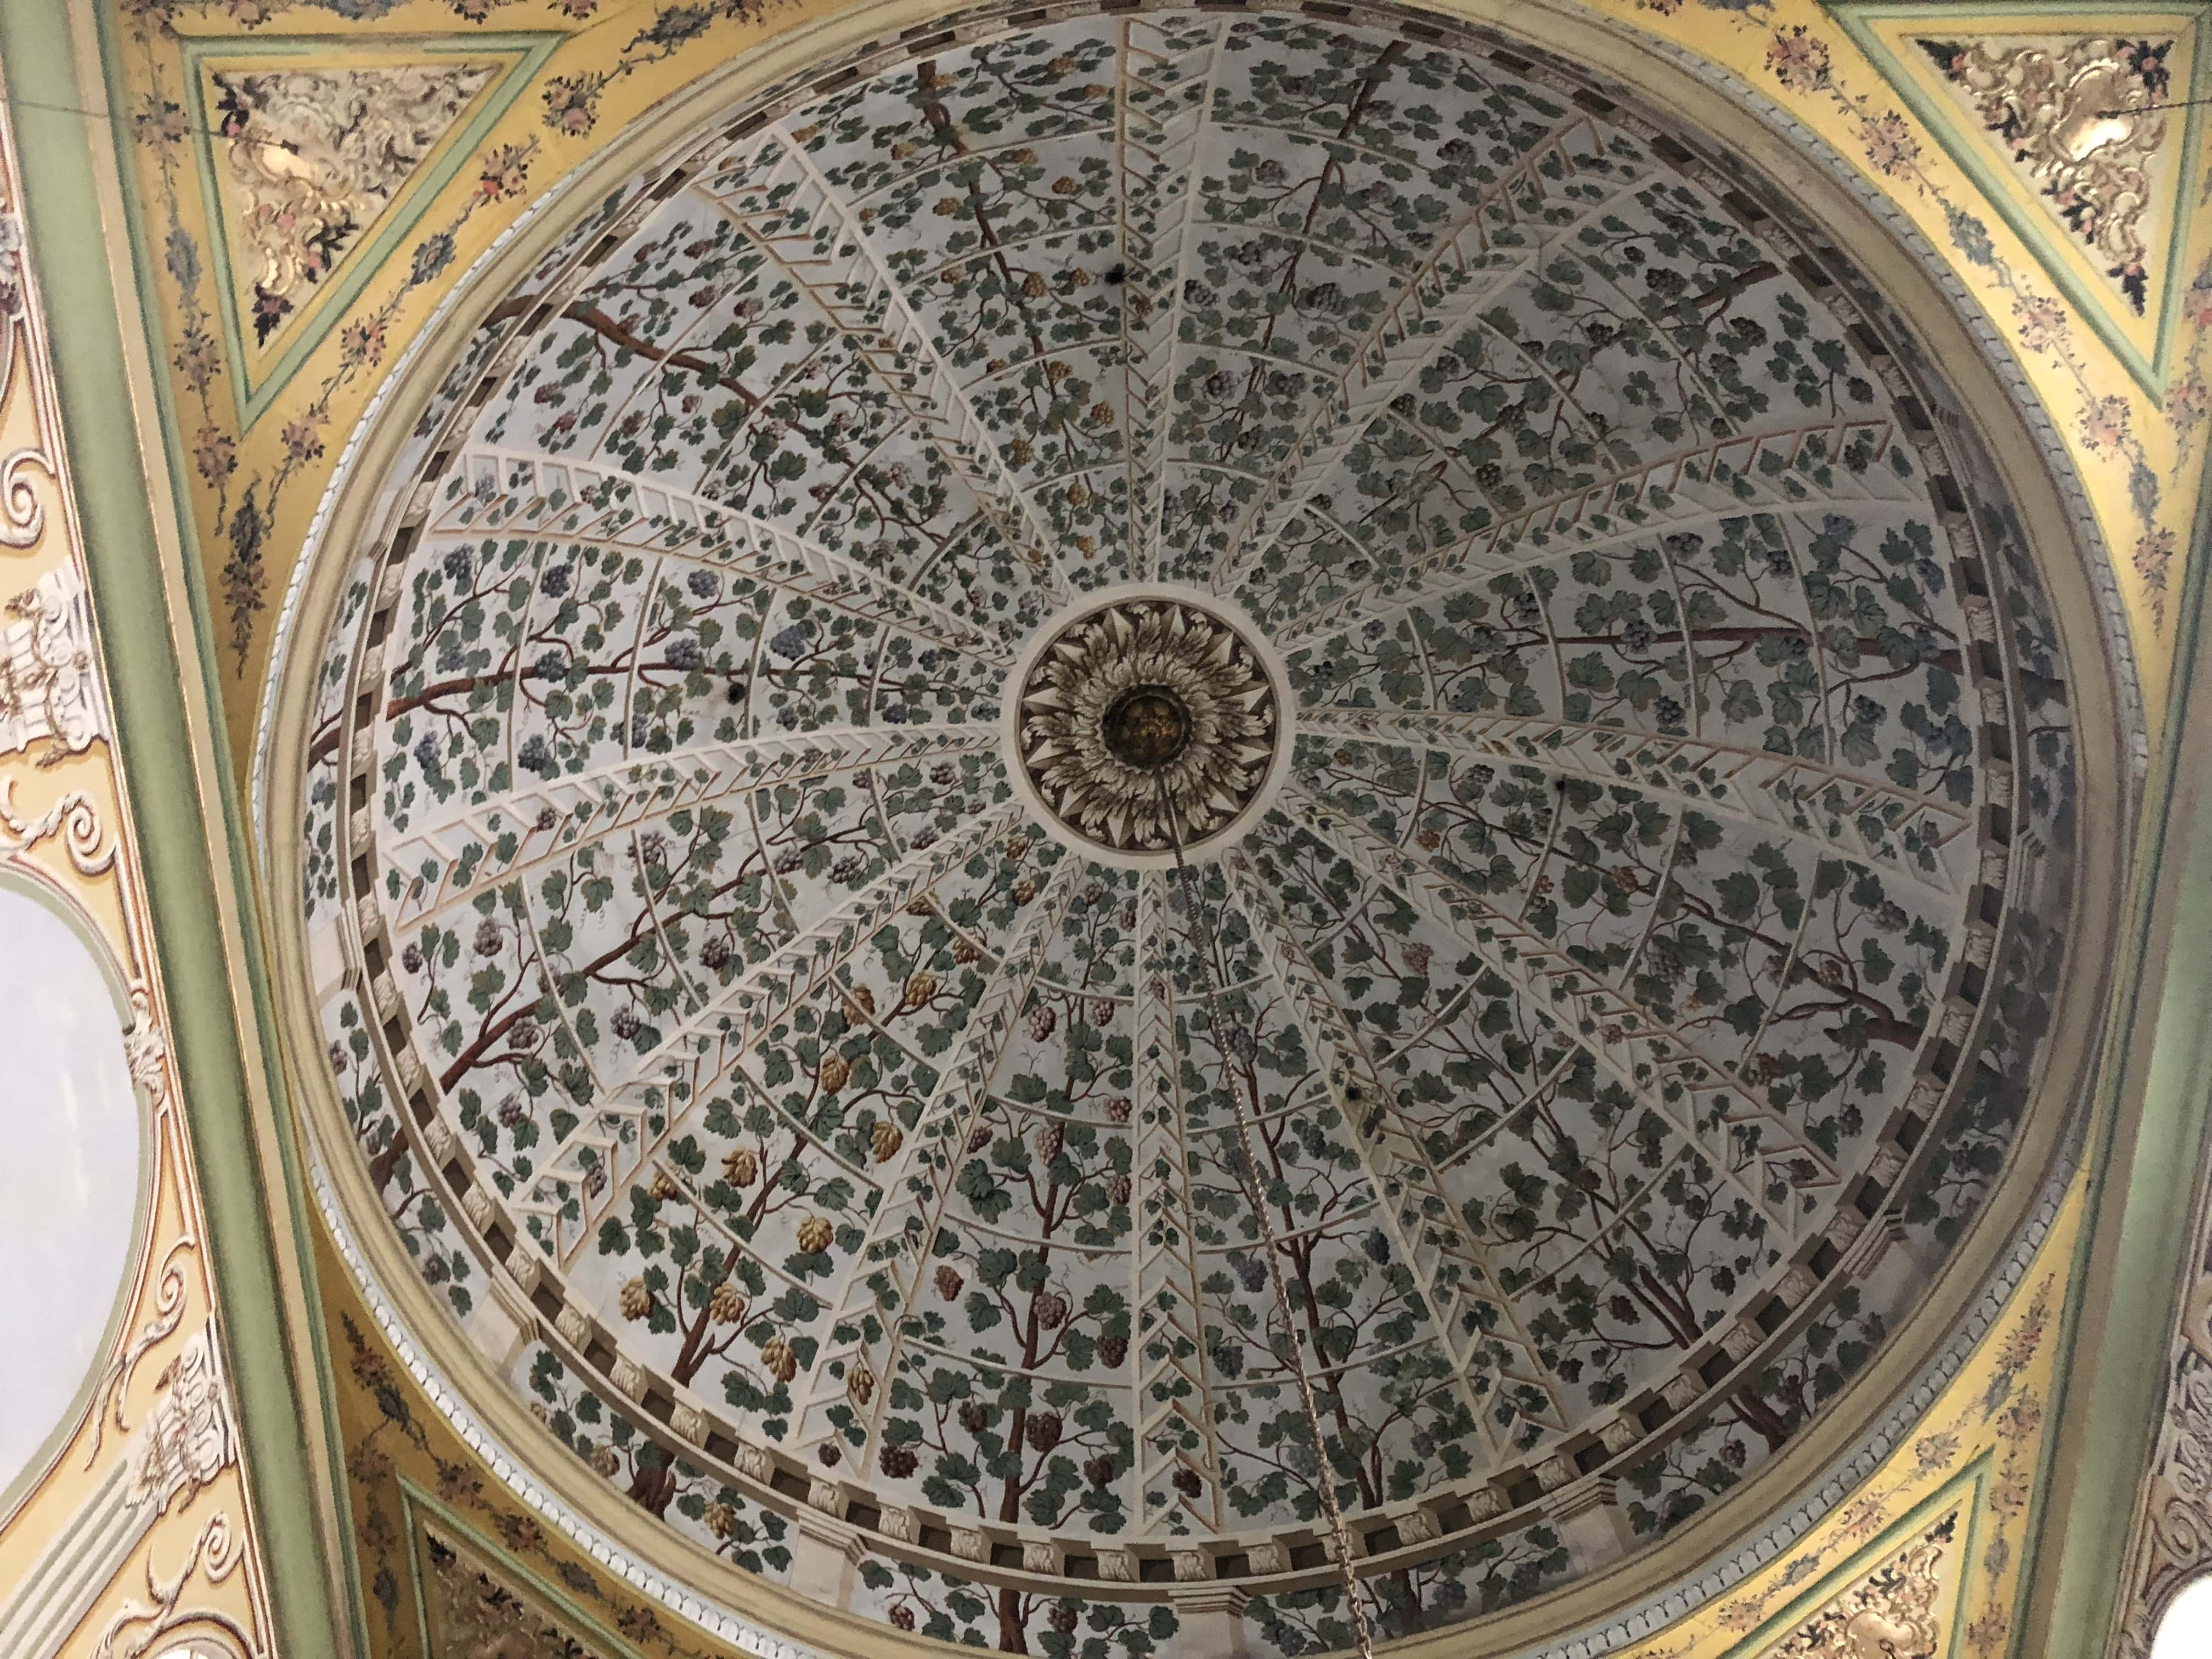 Dome in the Apartments of the Queen Mother in the Imperial Harem at Topkapi Palace in Istanbul, Turkey